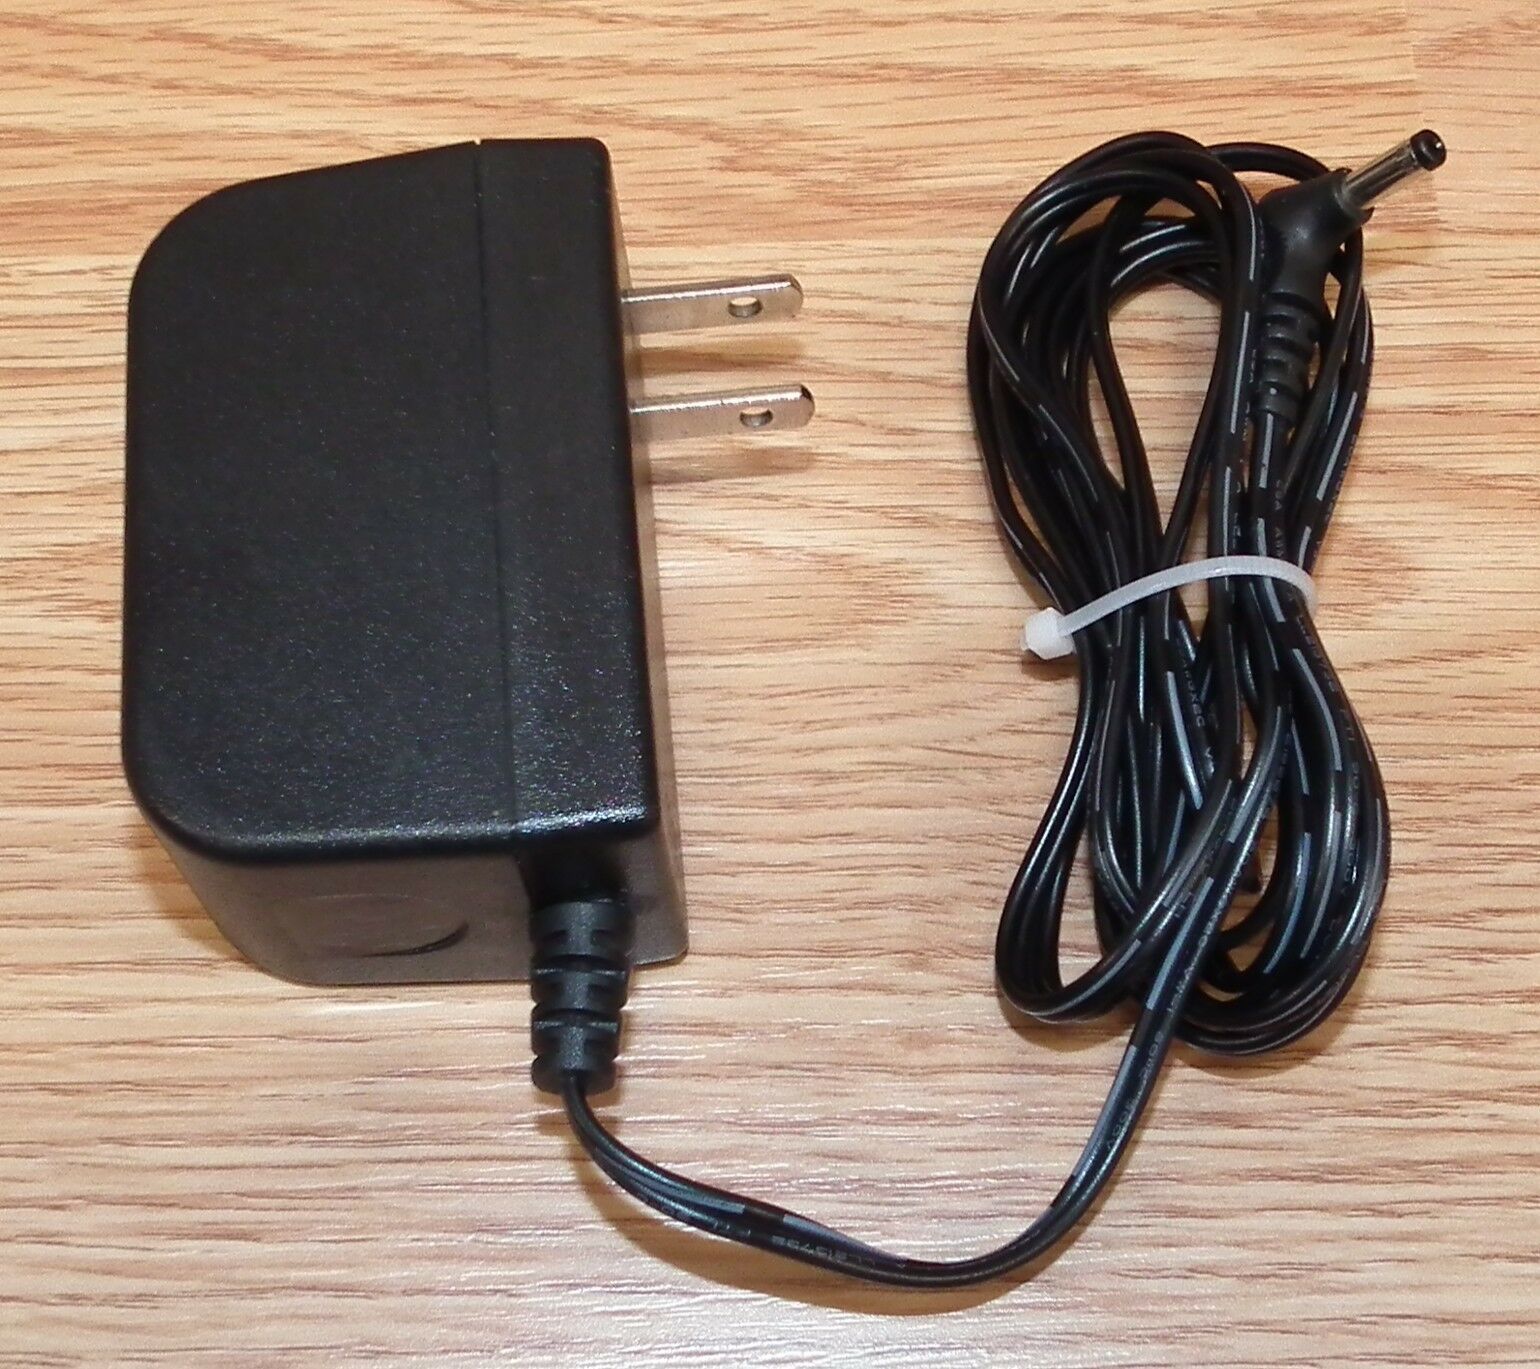 Genuine DVE (DVS-090A15FUS) +9V 1.5A AC Adapter / Power Supply Only Country/Region of Manufacture: China Brand: DVE